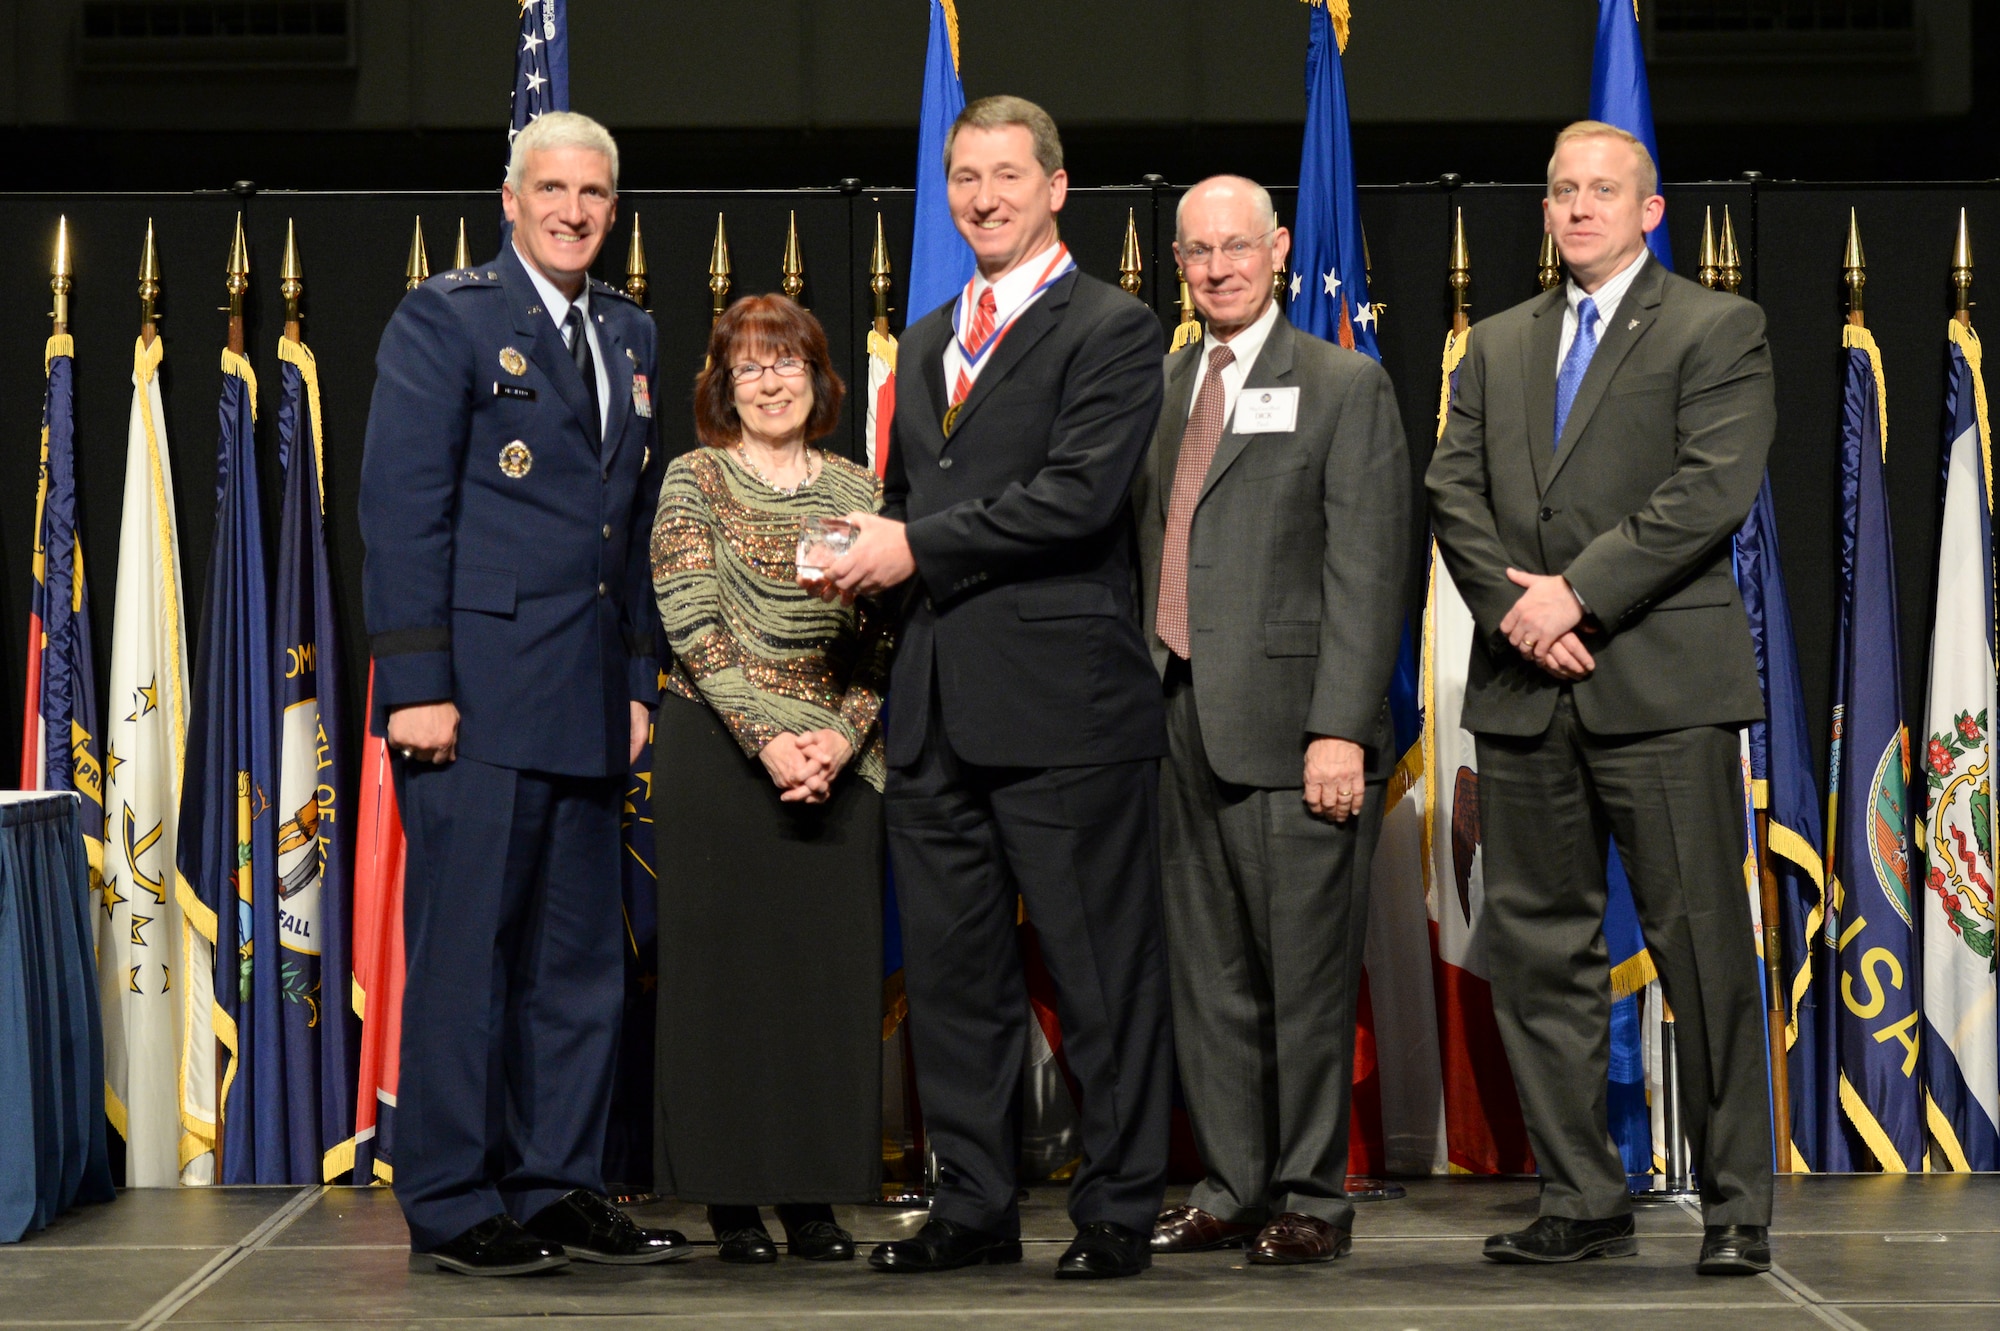 Dr. Paul Antonik, Air Force senior scientist for connectivity and dissemination, Air Force Research Laboratory's Information Directorate and his wife Cathy are honored during the 2014 AFRL Fellows and Early Career Awards Banquet, held Oct. 30 at the National Museum of the U.S. Air Force. Joining them are Maj. Gen Tom Masiello, AFRL commander, retired Maj. Gen. Dick Paul, AFRL's first commander, and Dr. Morley Stone, AFRL chief technology officer.  (U.S. Air Force photo/Wesley Farnsworth)